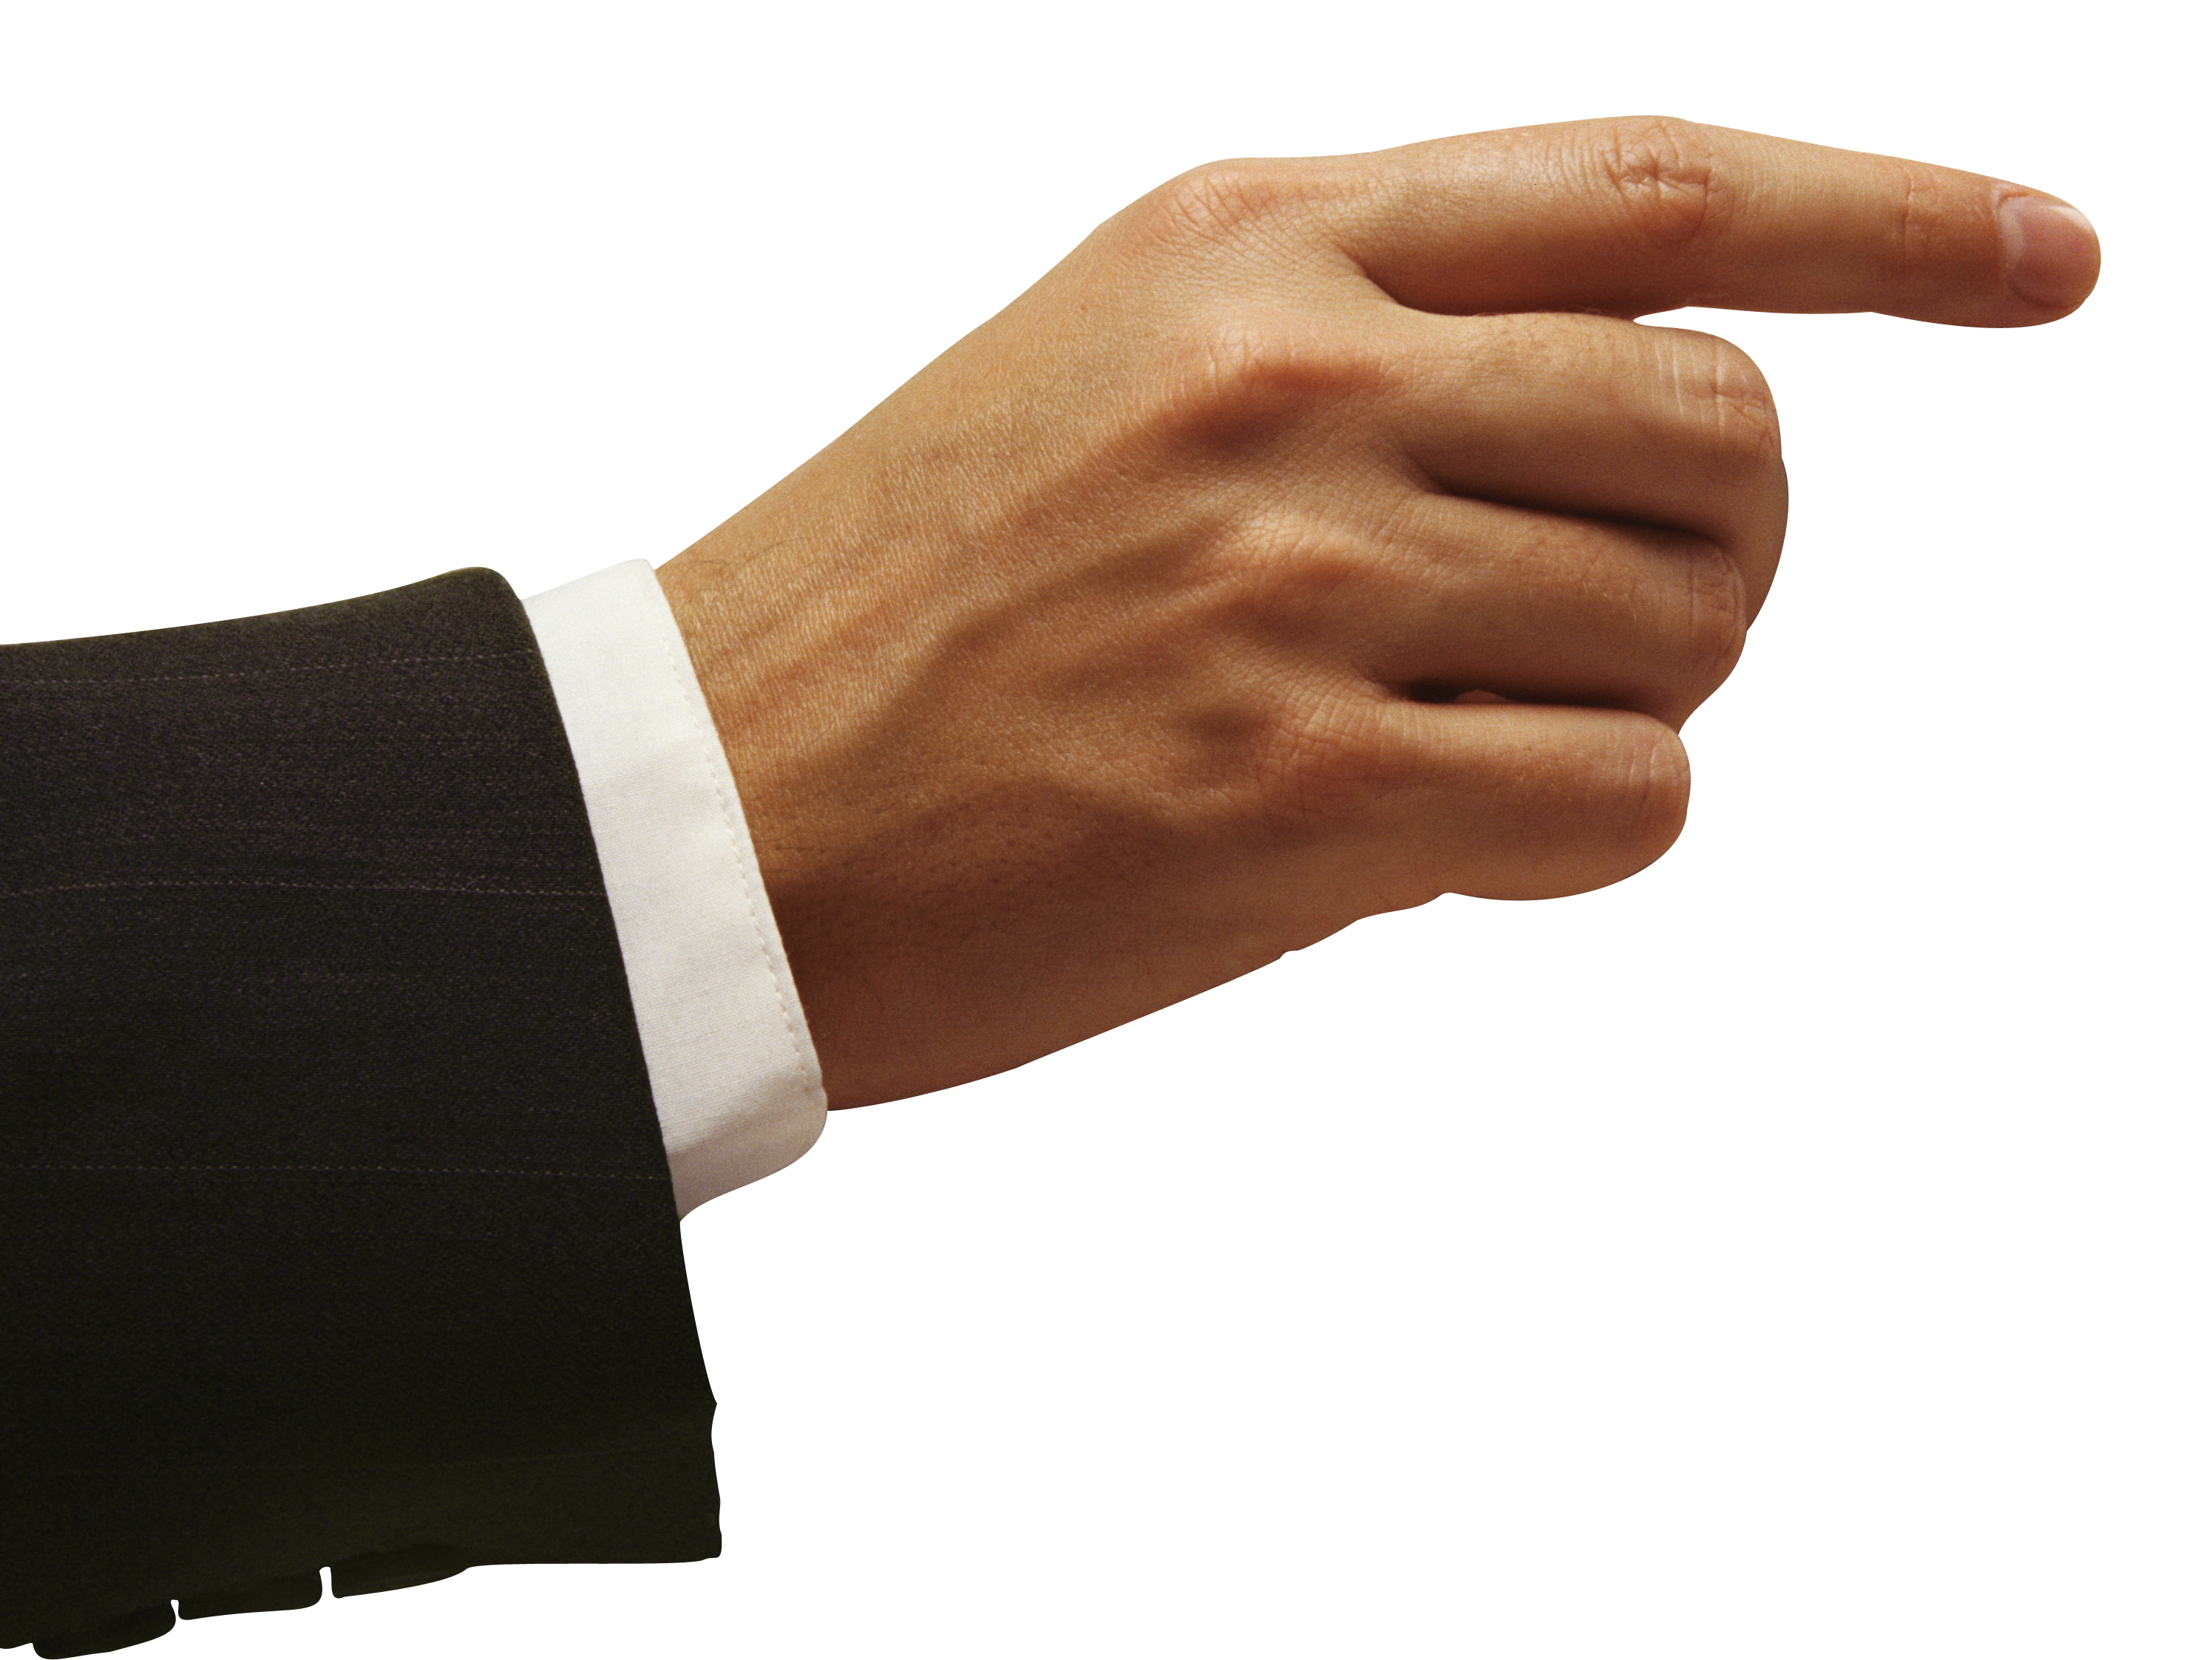 Hands clipart wrist. Showing hand png image